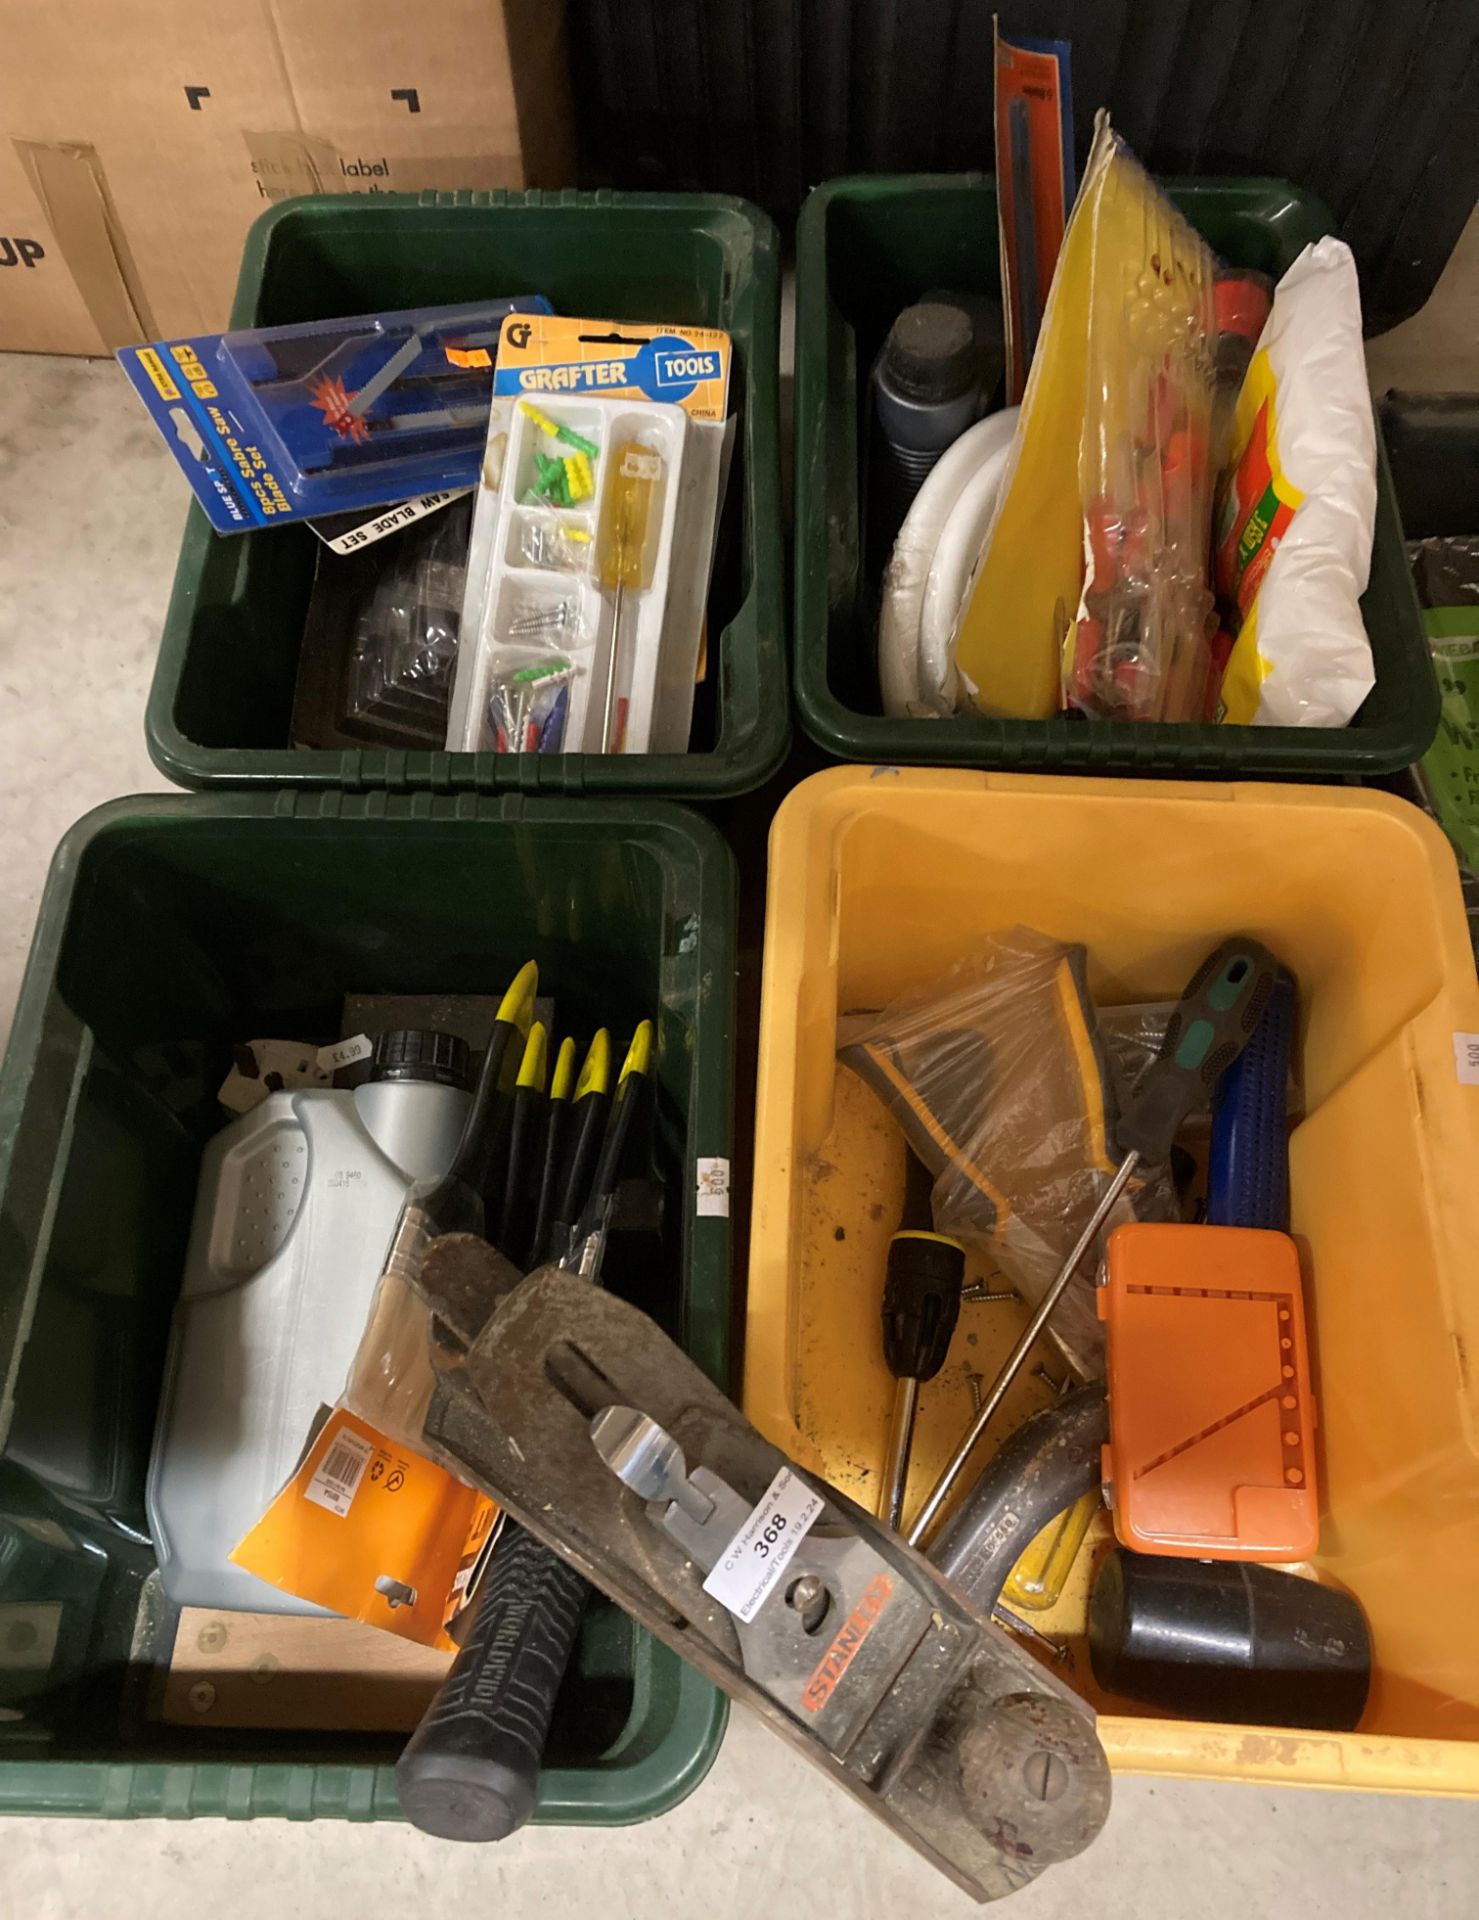 5 x items and contents - Stanley N04 plane, assorted hand tools, paint brushes, - Image 2 of 2